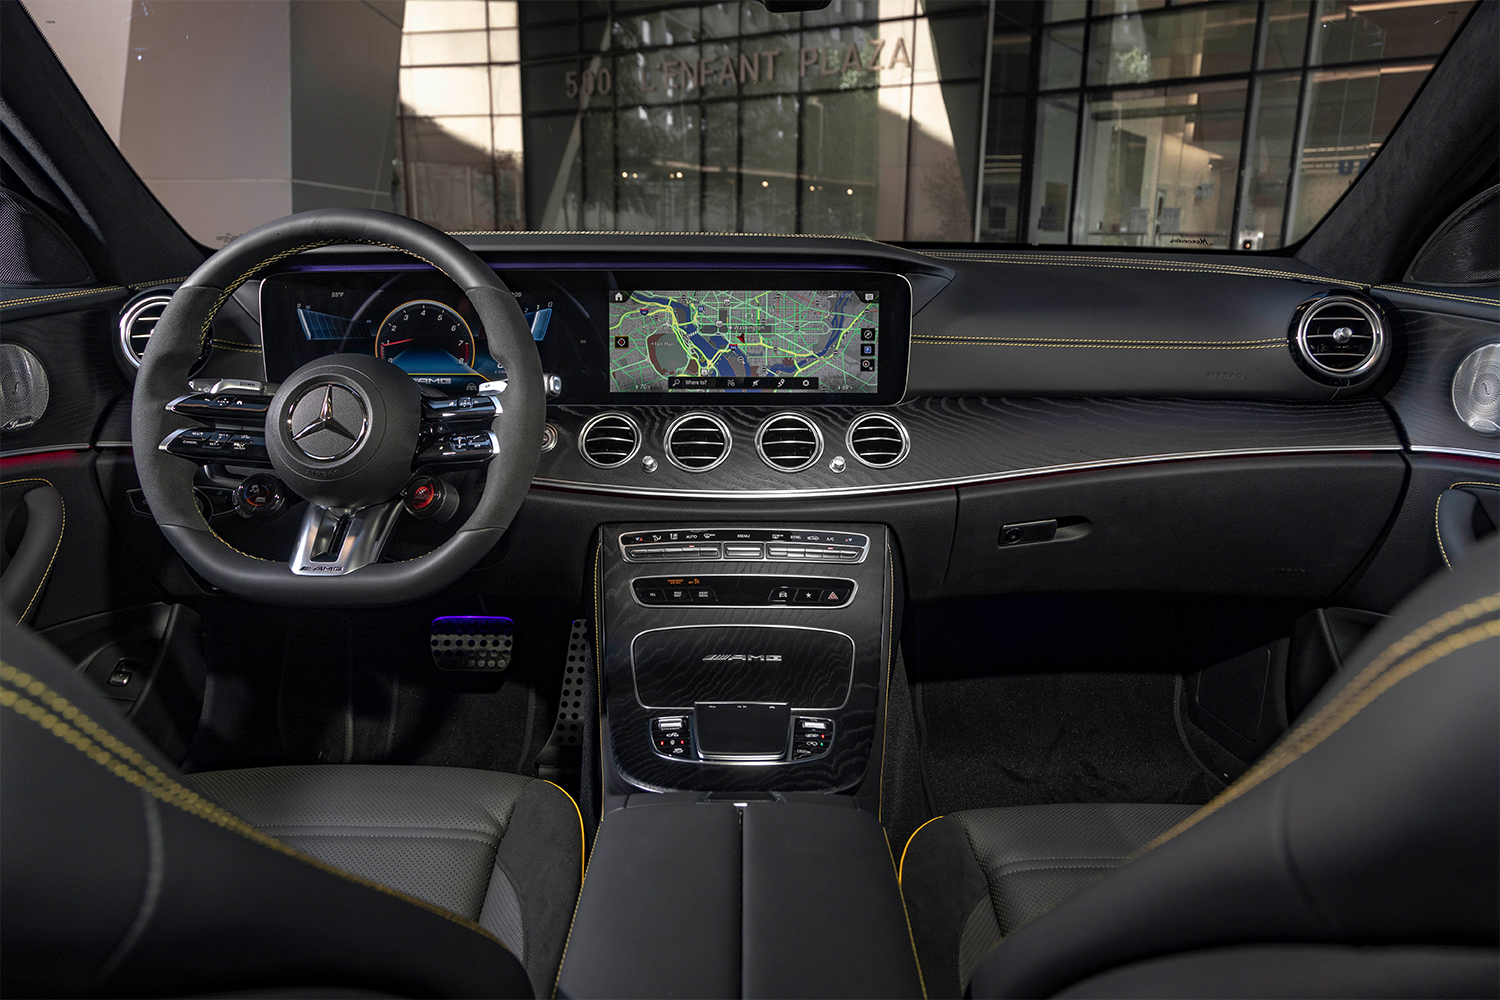 The dash inside the new 2021 Mercedes-AMG E63 S 4MATIC Station Wagon. A little overkill, but still a great driving experience.